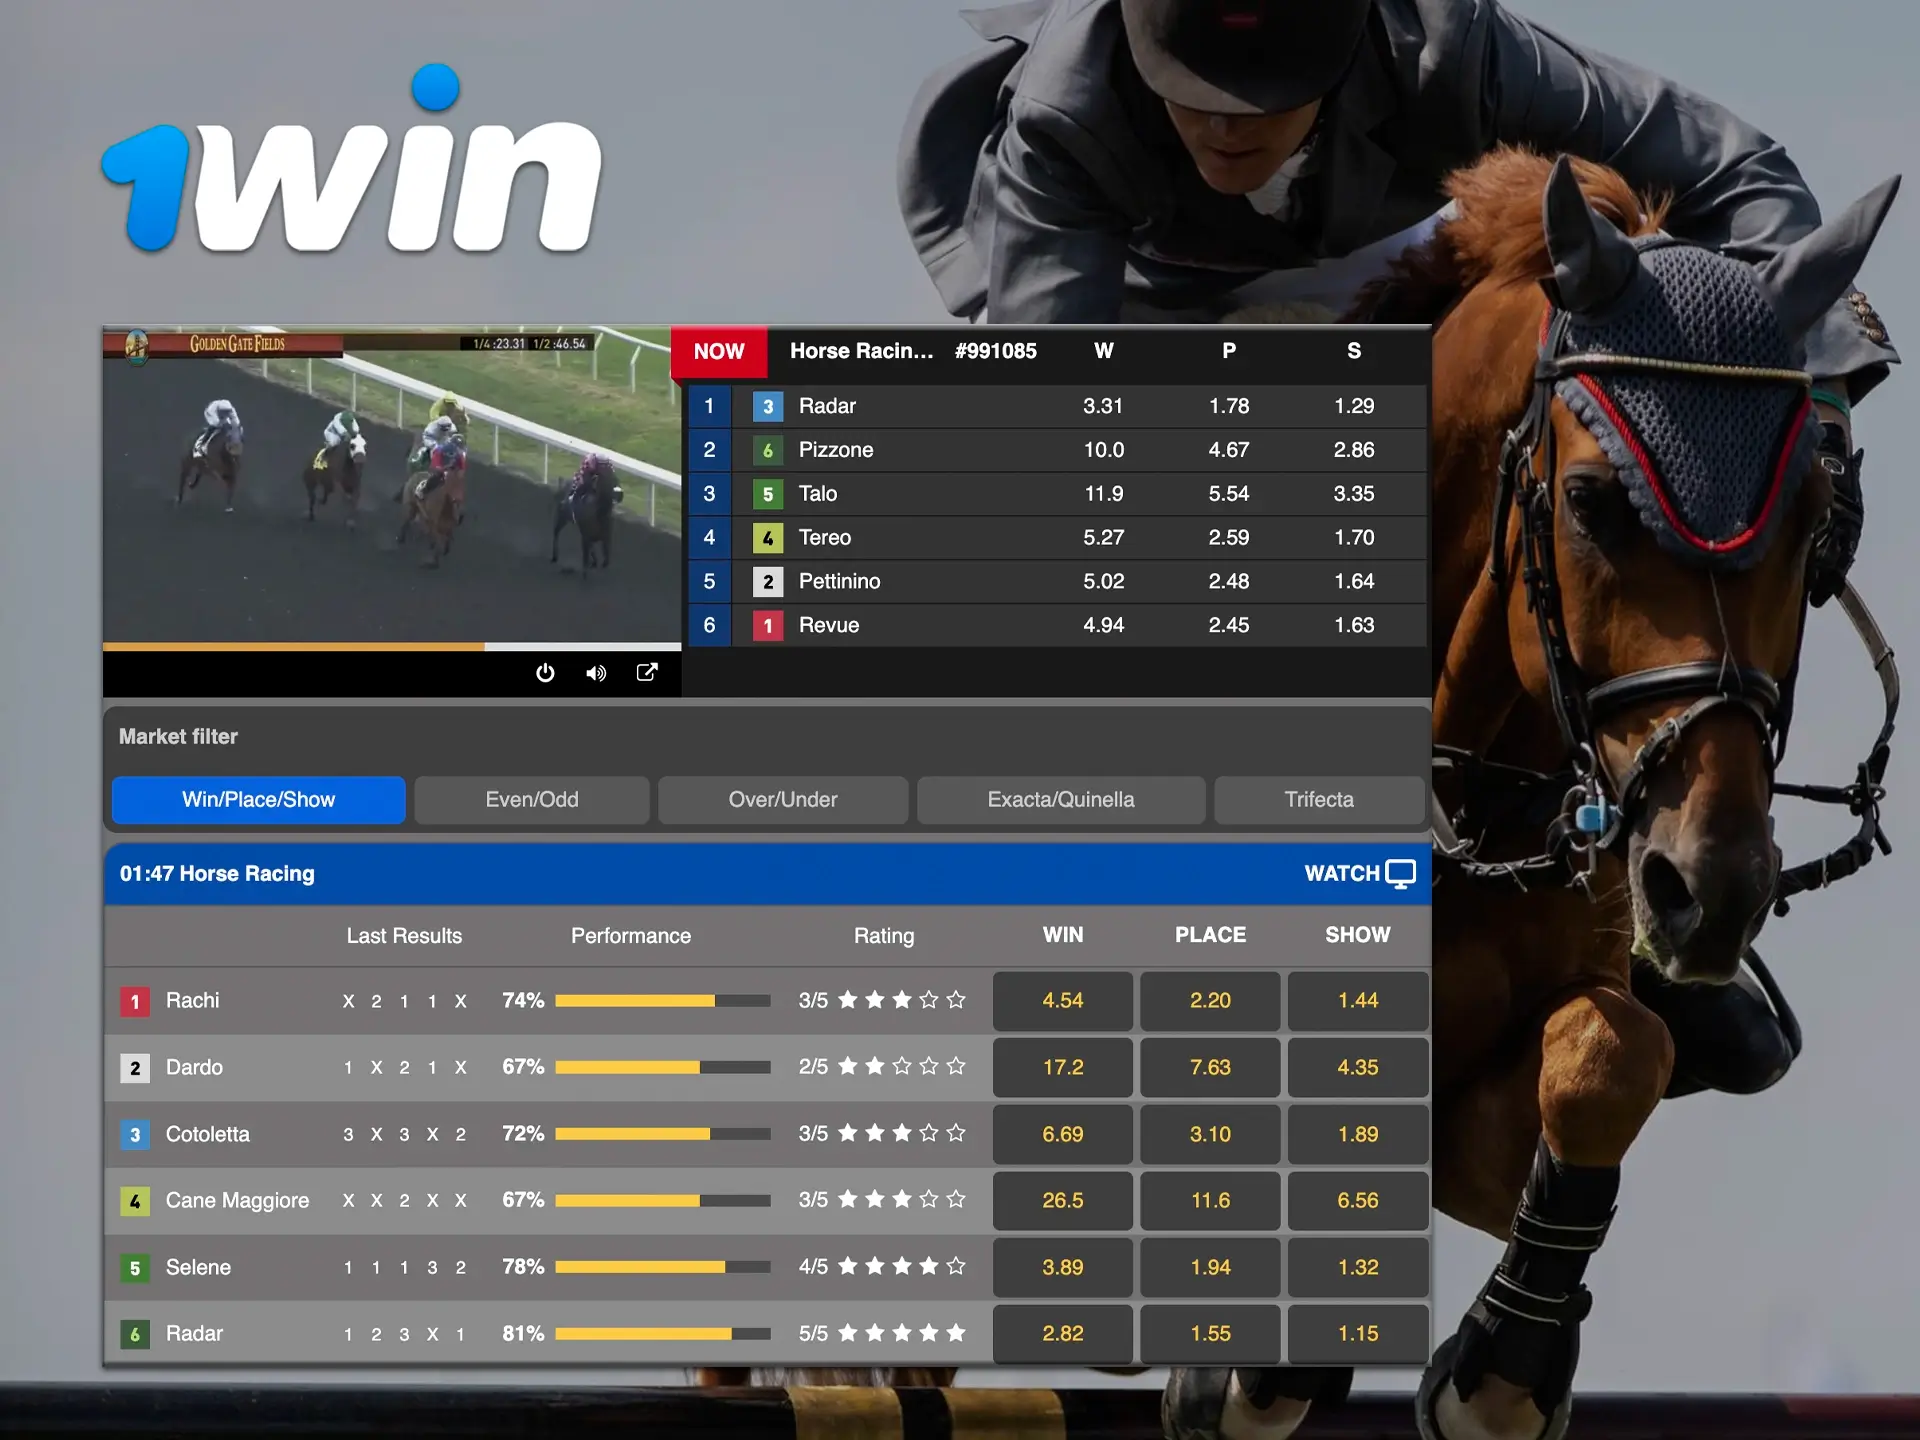 1Win has a simple and straightforward interface in the horse racing betting section.